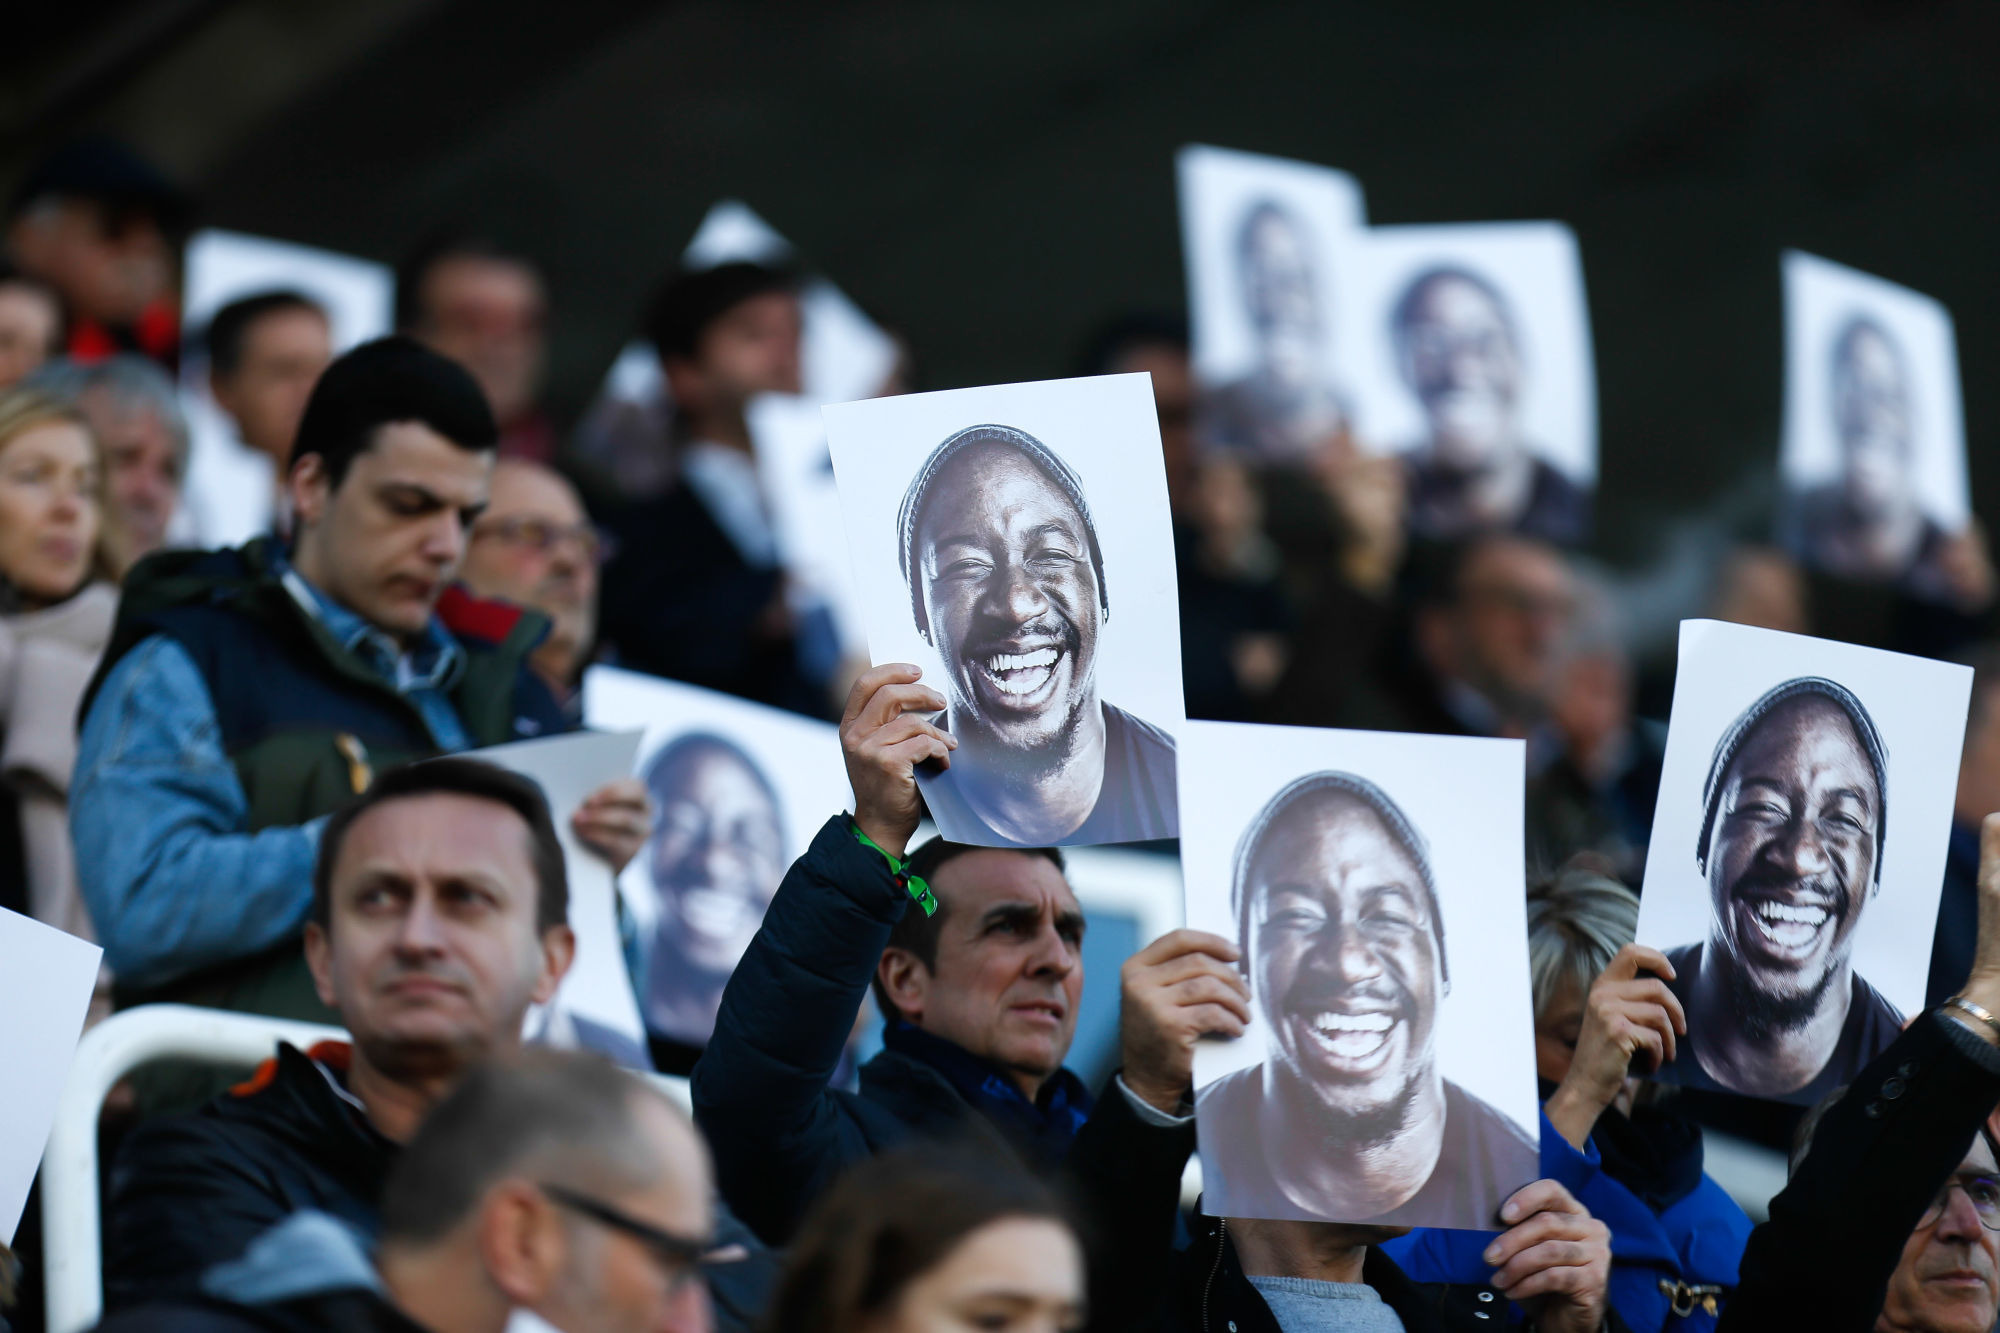 Illustration Tribute to Ibrahim Diarra during the Top 14 match between Castres and Lyon at Stade Pierre-Fabre on December 21, 2019 in Castres, France. (Photo by Laurent Frezouls/Icon Sport) - Stade Pierre Fabre - Castres (France)